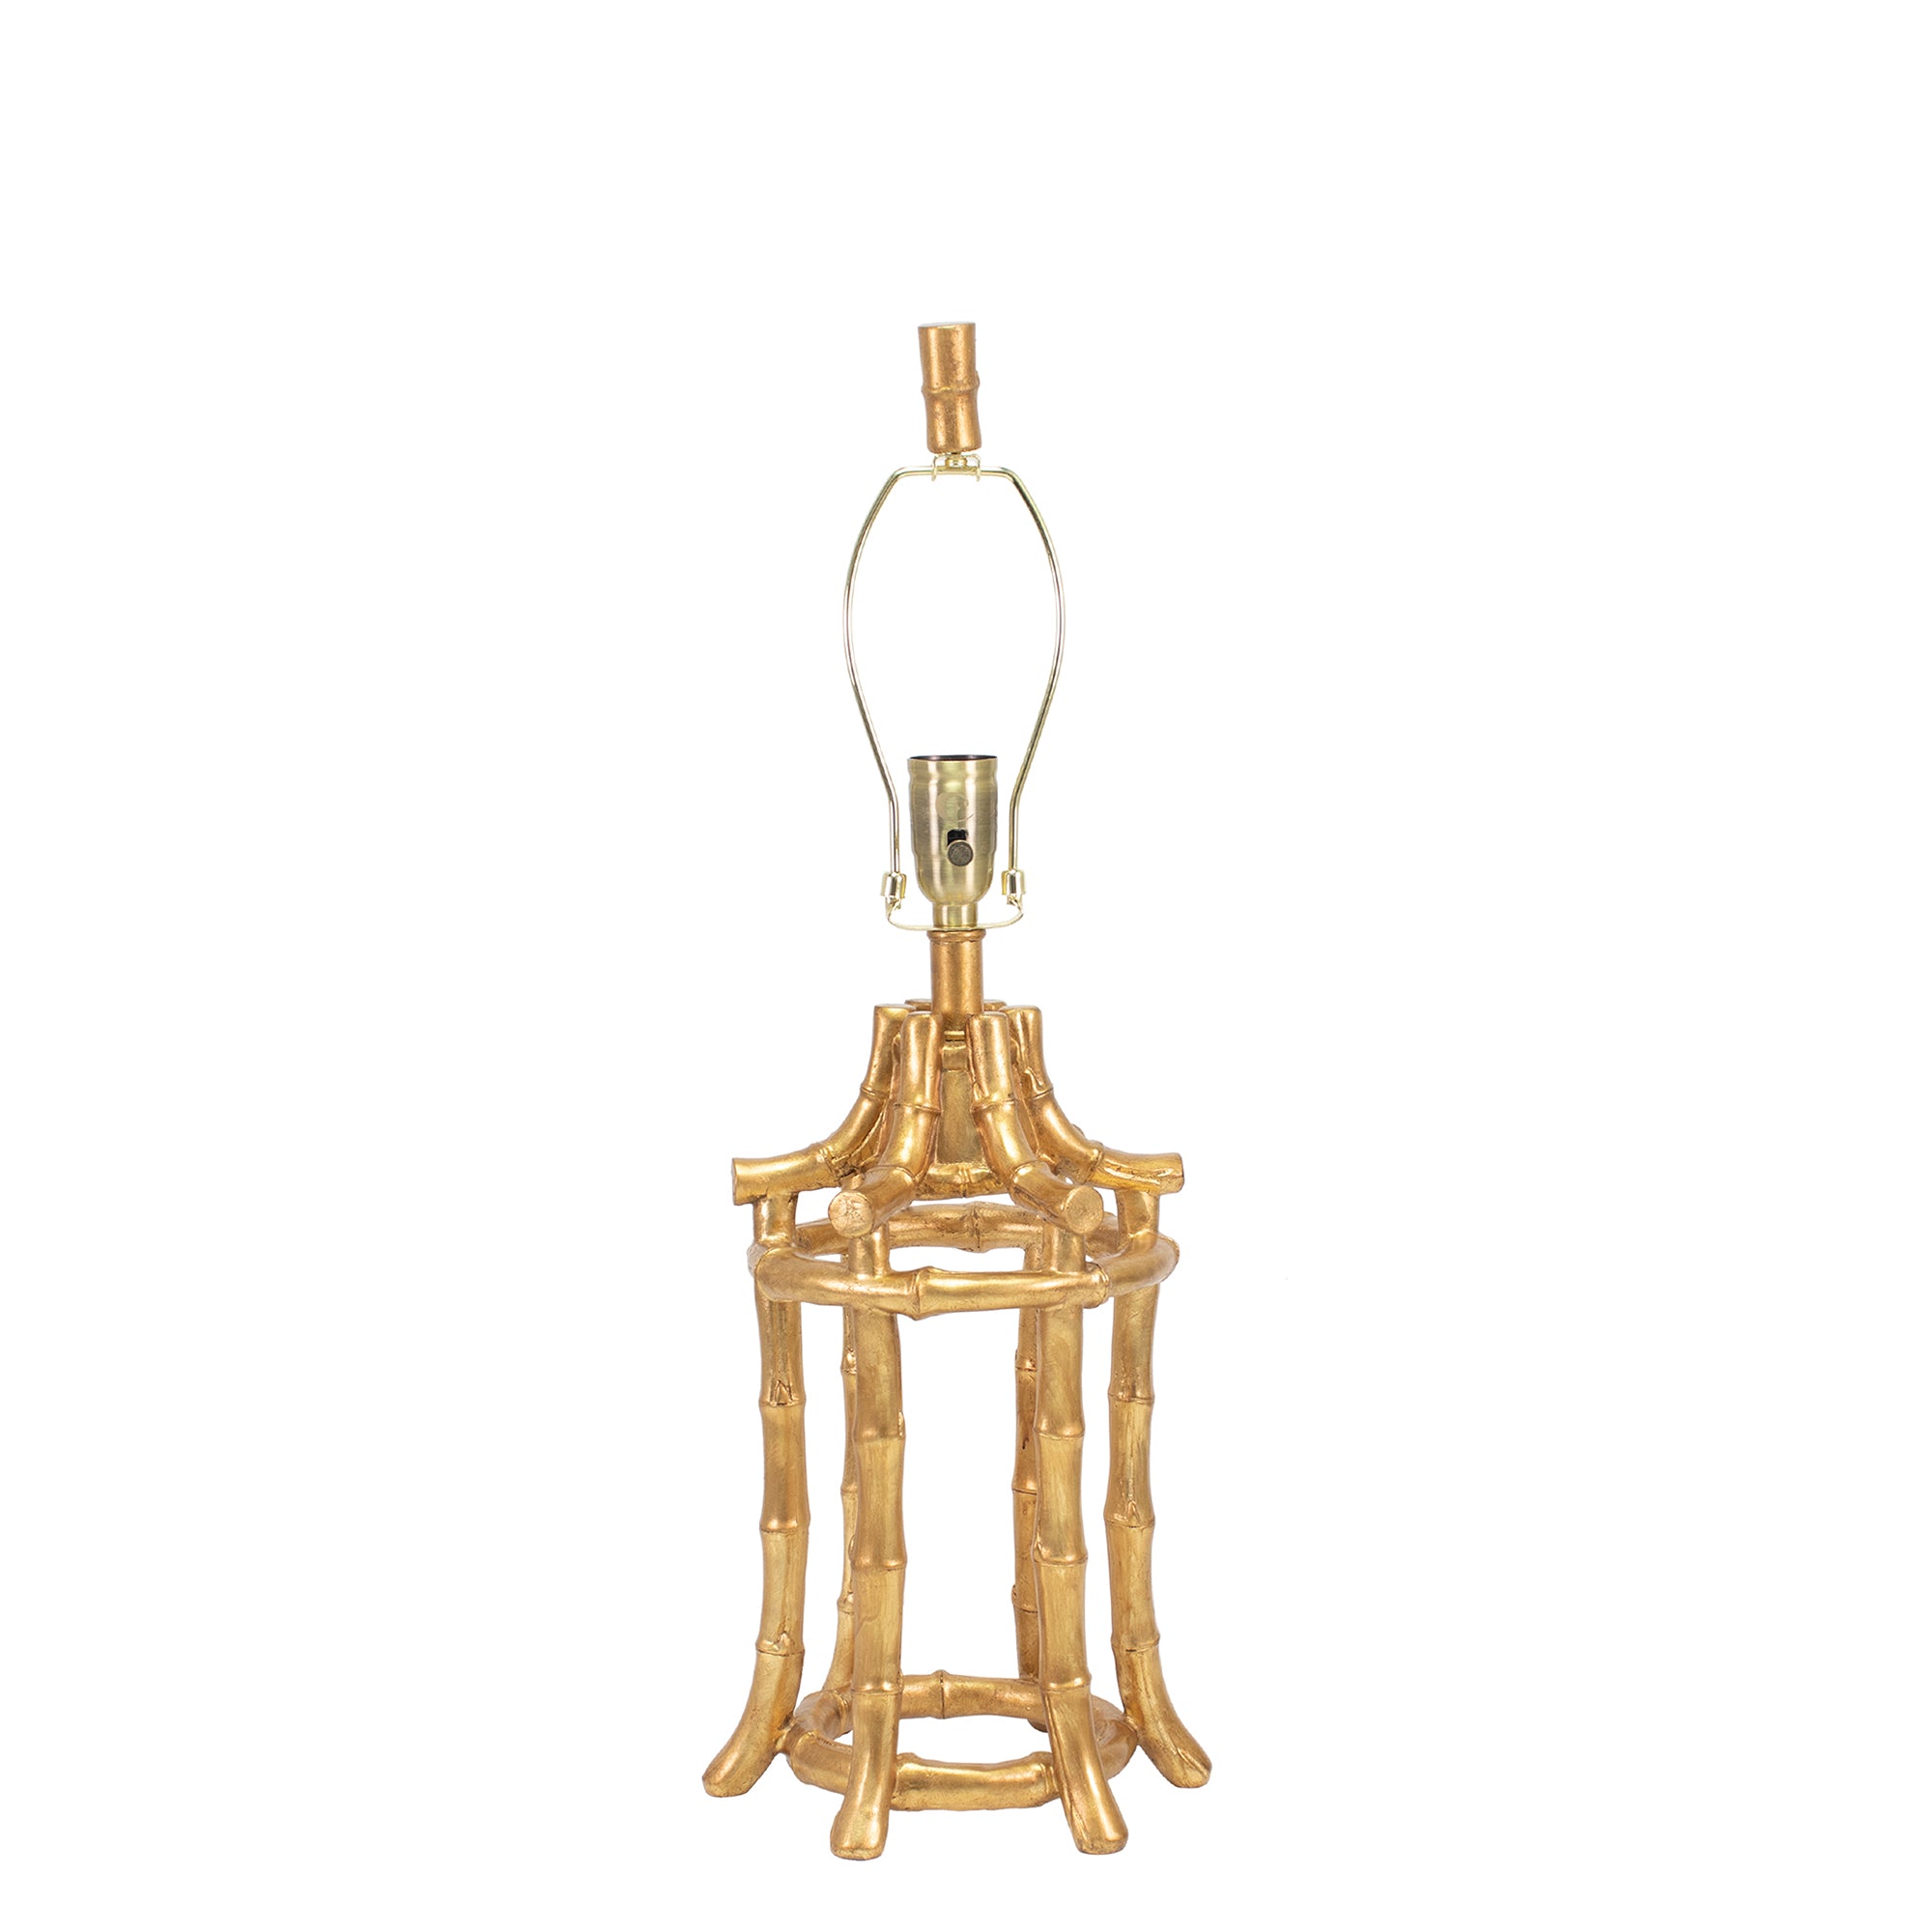 Bamboo Table Lamp, Gold - Couture Lamps